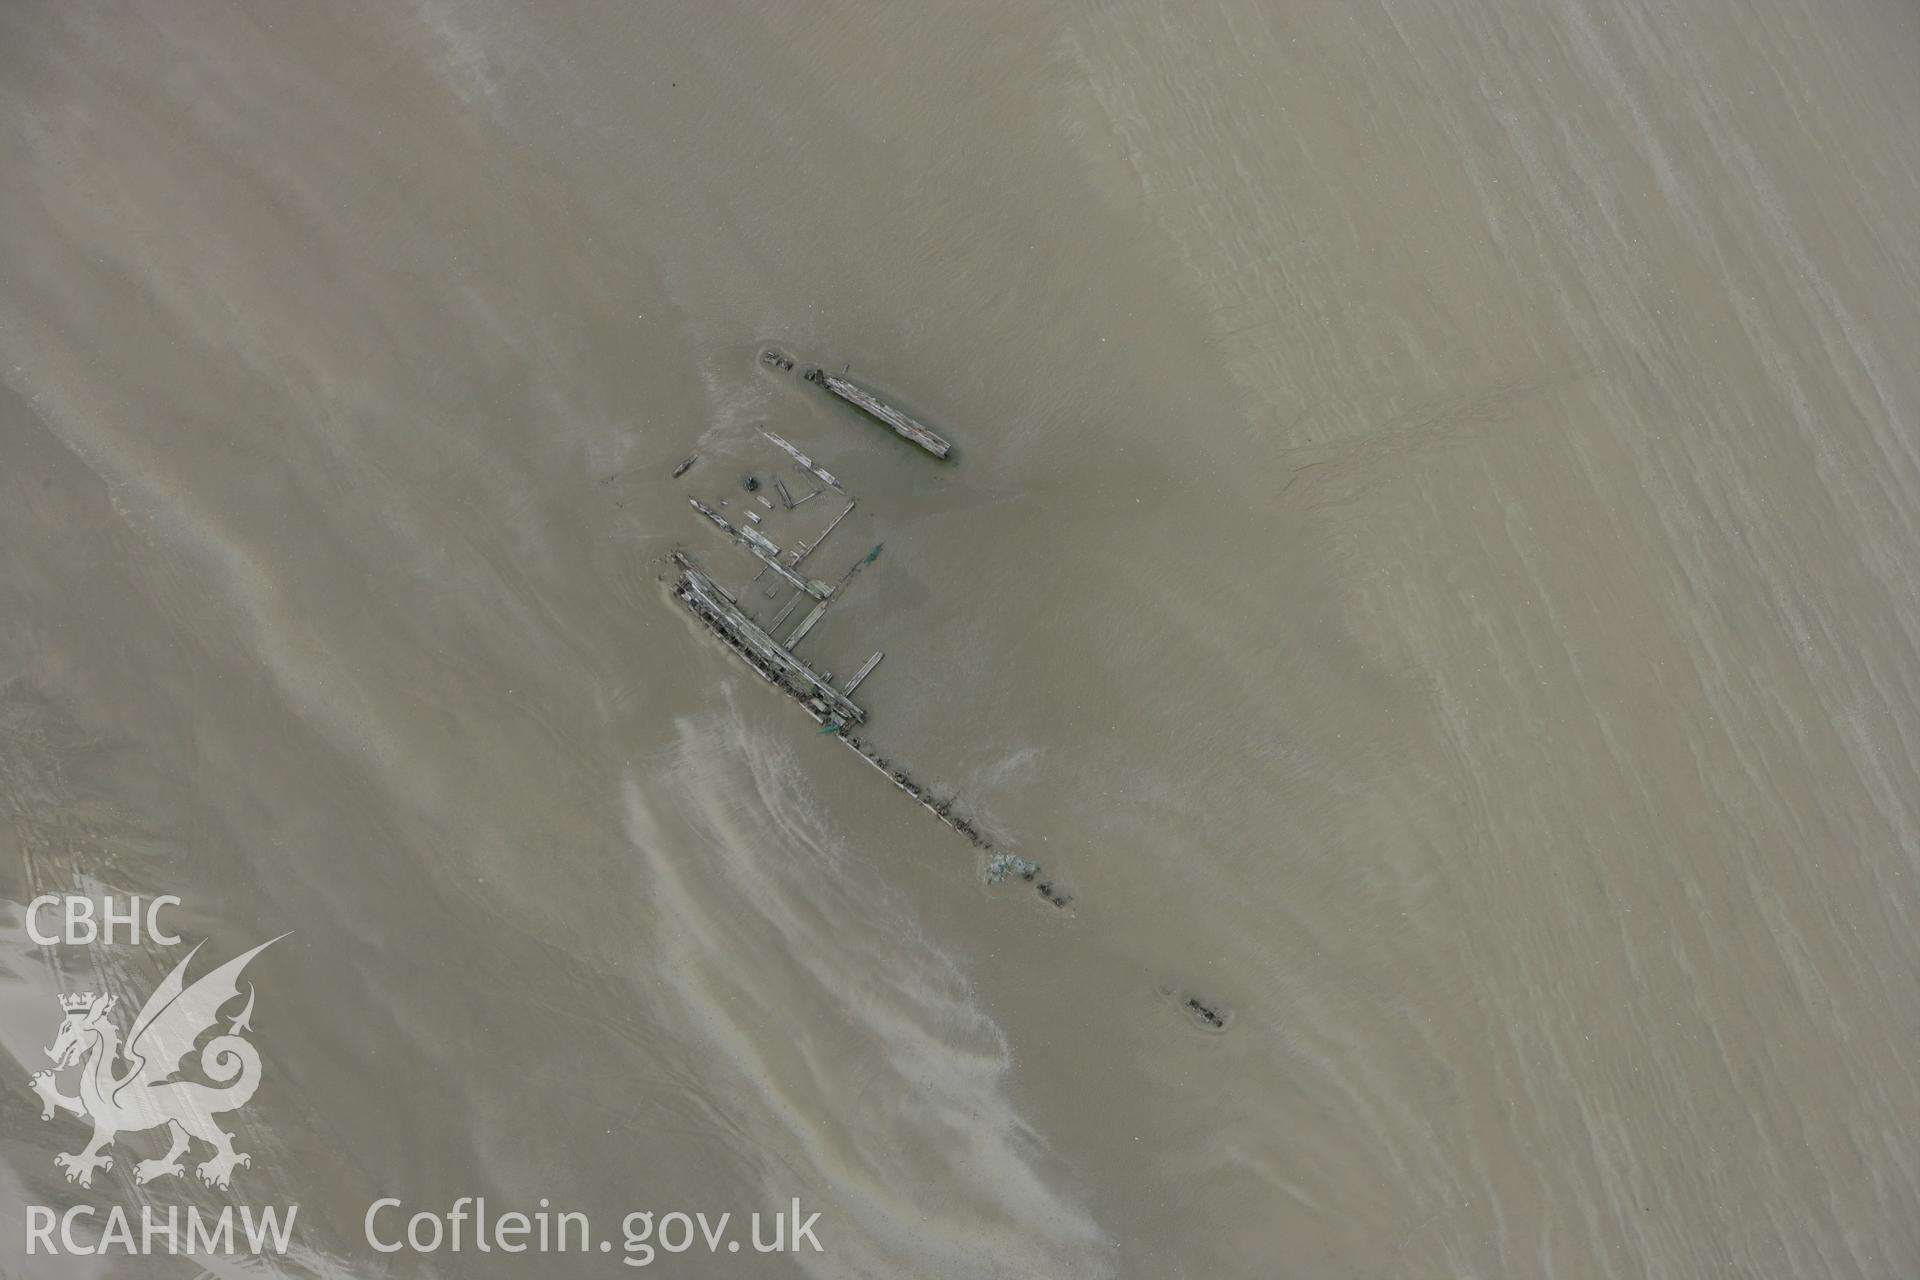 RCAHMW colour oblique photograph of Paul shipwreck, Cefn Sidan Sands. Taken by Toby Driver on 20/06/2008.